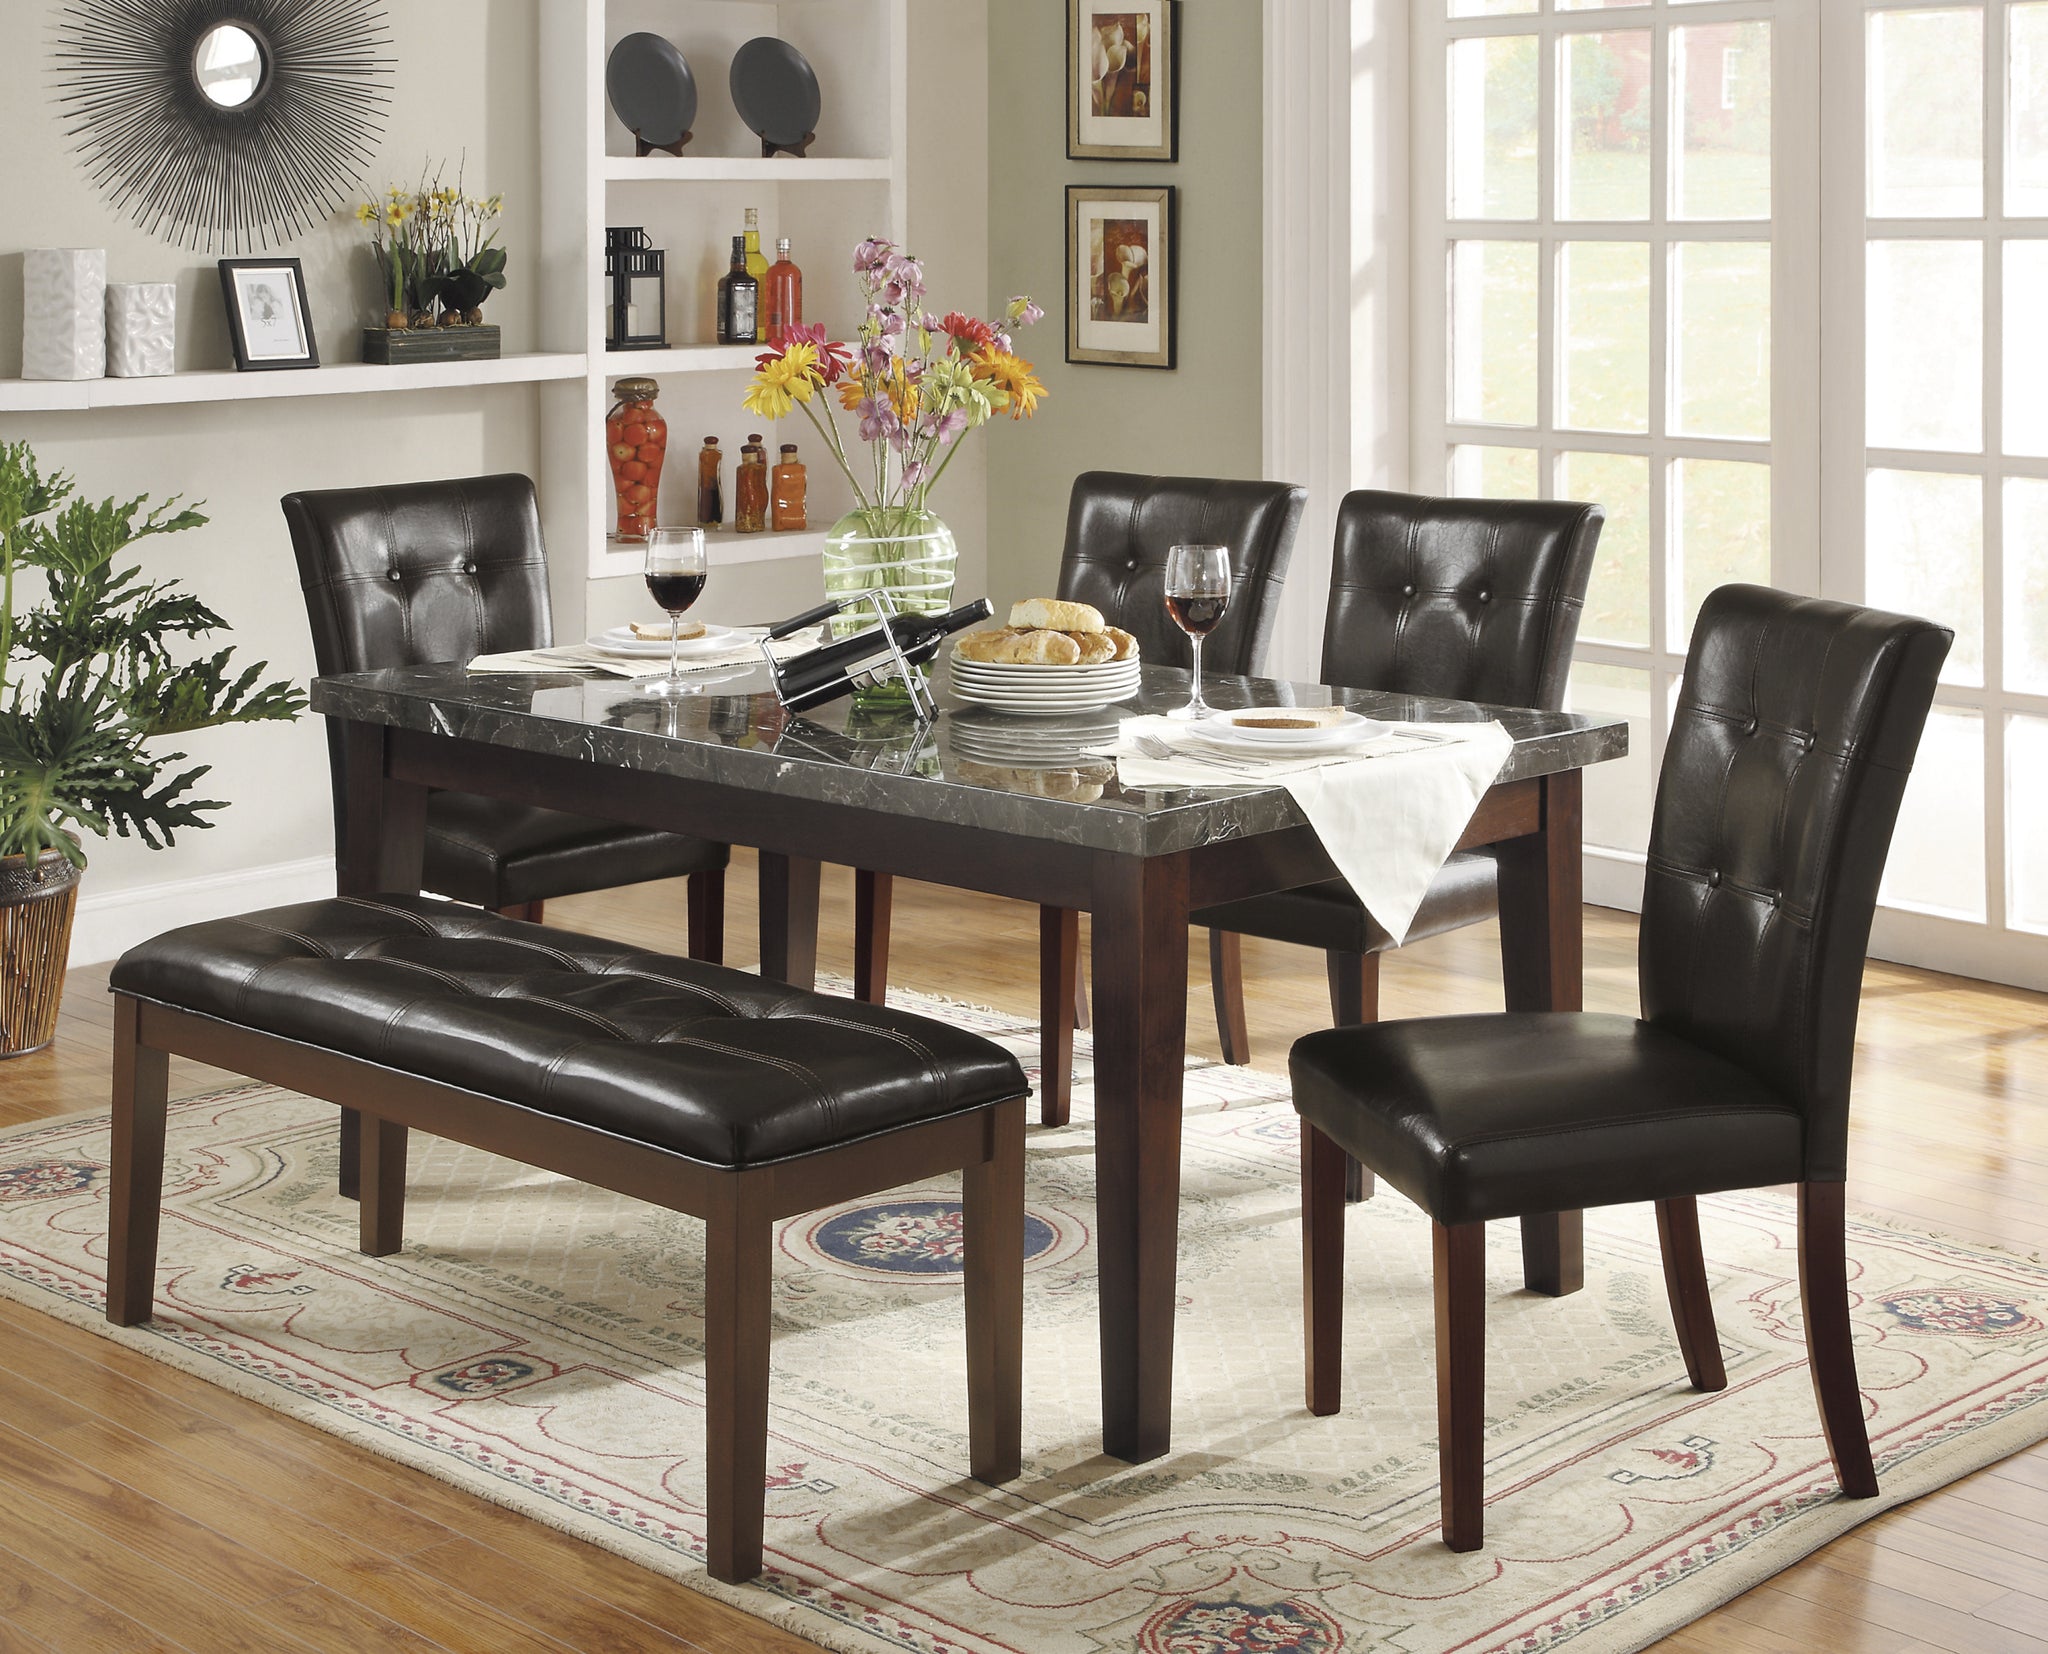 Transitional Dining Table 1pc Espresso Finish Wood espresso-dining room-wood